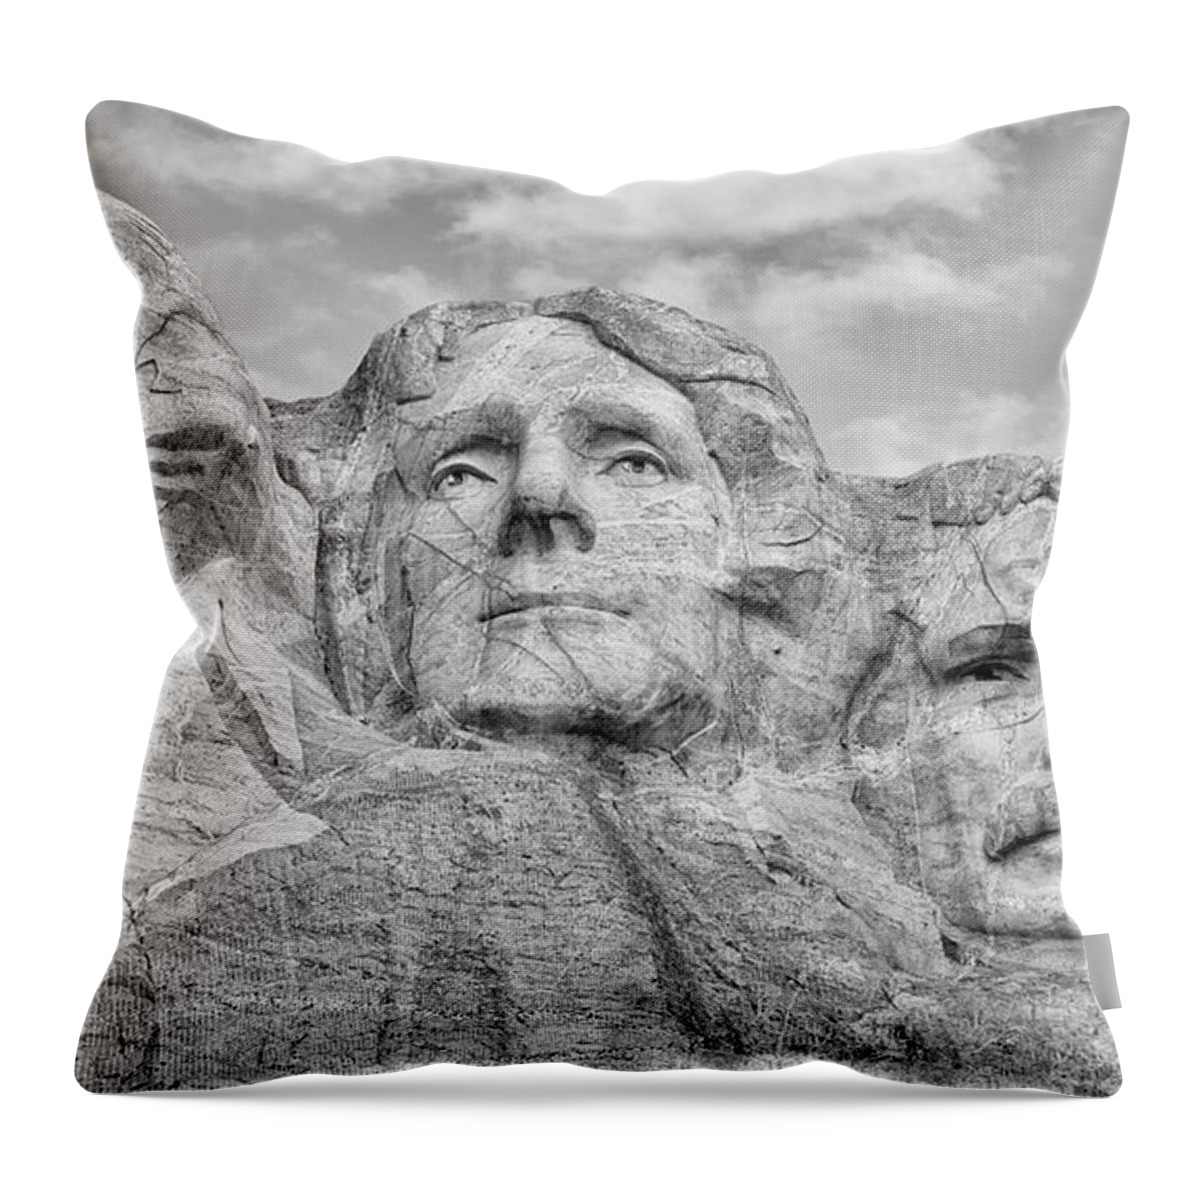 B+w Throw Pillow featuring the photograph Mount Rushmore BW by Jerry Fornarotto